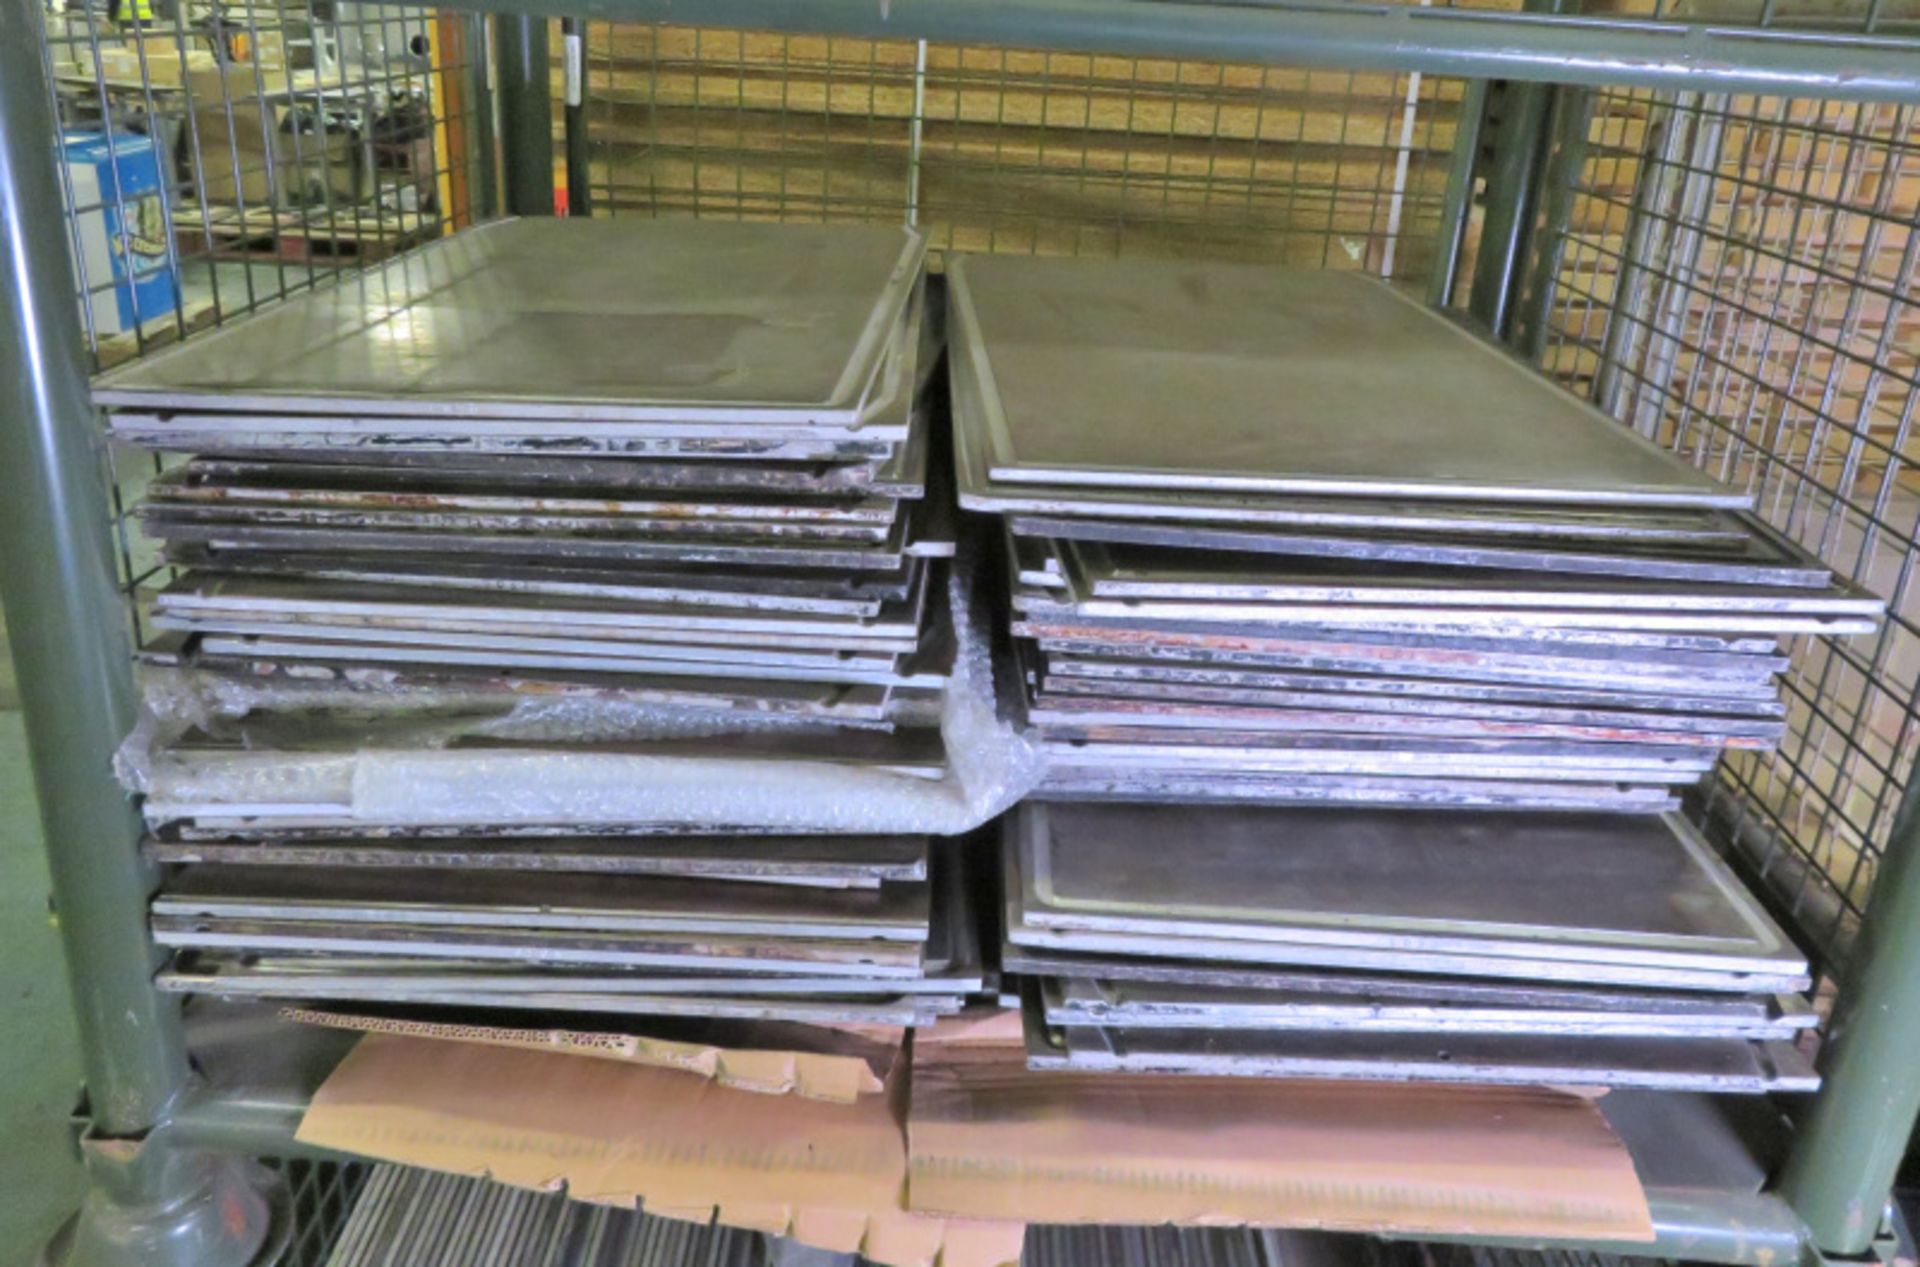 80x Catering Metal Griddle Plates - L 800mm x W 500mm - 14kgseach - Image 2 of 2